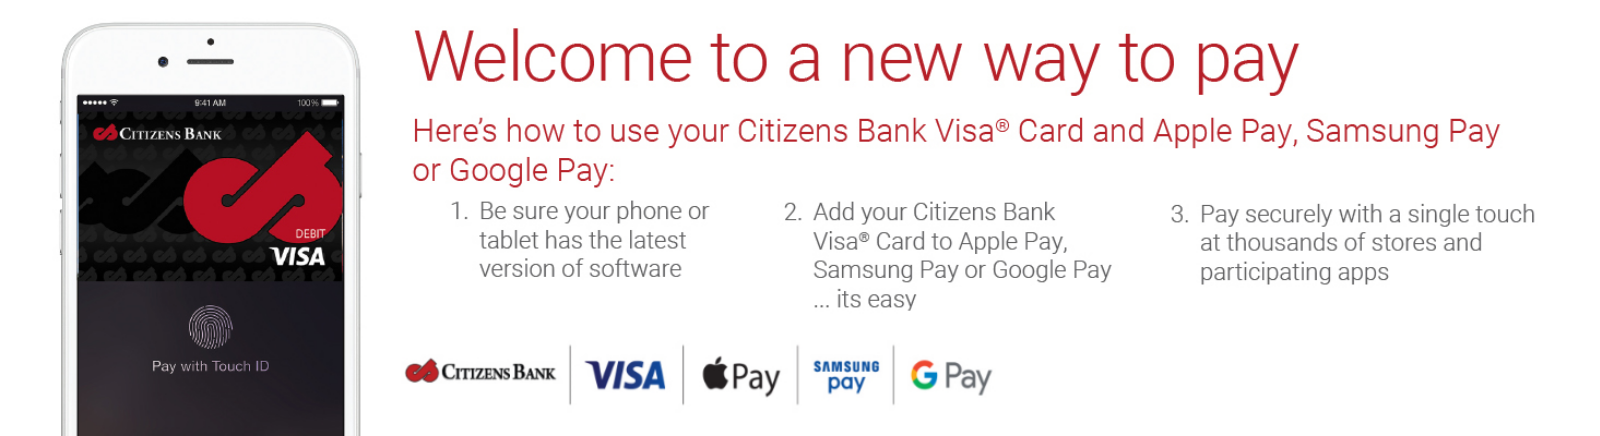 Welcome to a new way to pay. Heres how to use Citizens Bank Visa Card and Apple Pay, Samasung Pay, or Google Pay. 1. Be sure your phone or tablet has the lastest version of software. 2. Add your Citizens Bank VisaCard to Apply Pay, Samsung Pay, or Google Pay ... its easy. 3. Pay securely with a signle touch at thousands of stores and participating apps.